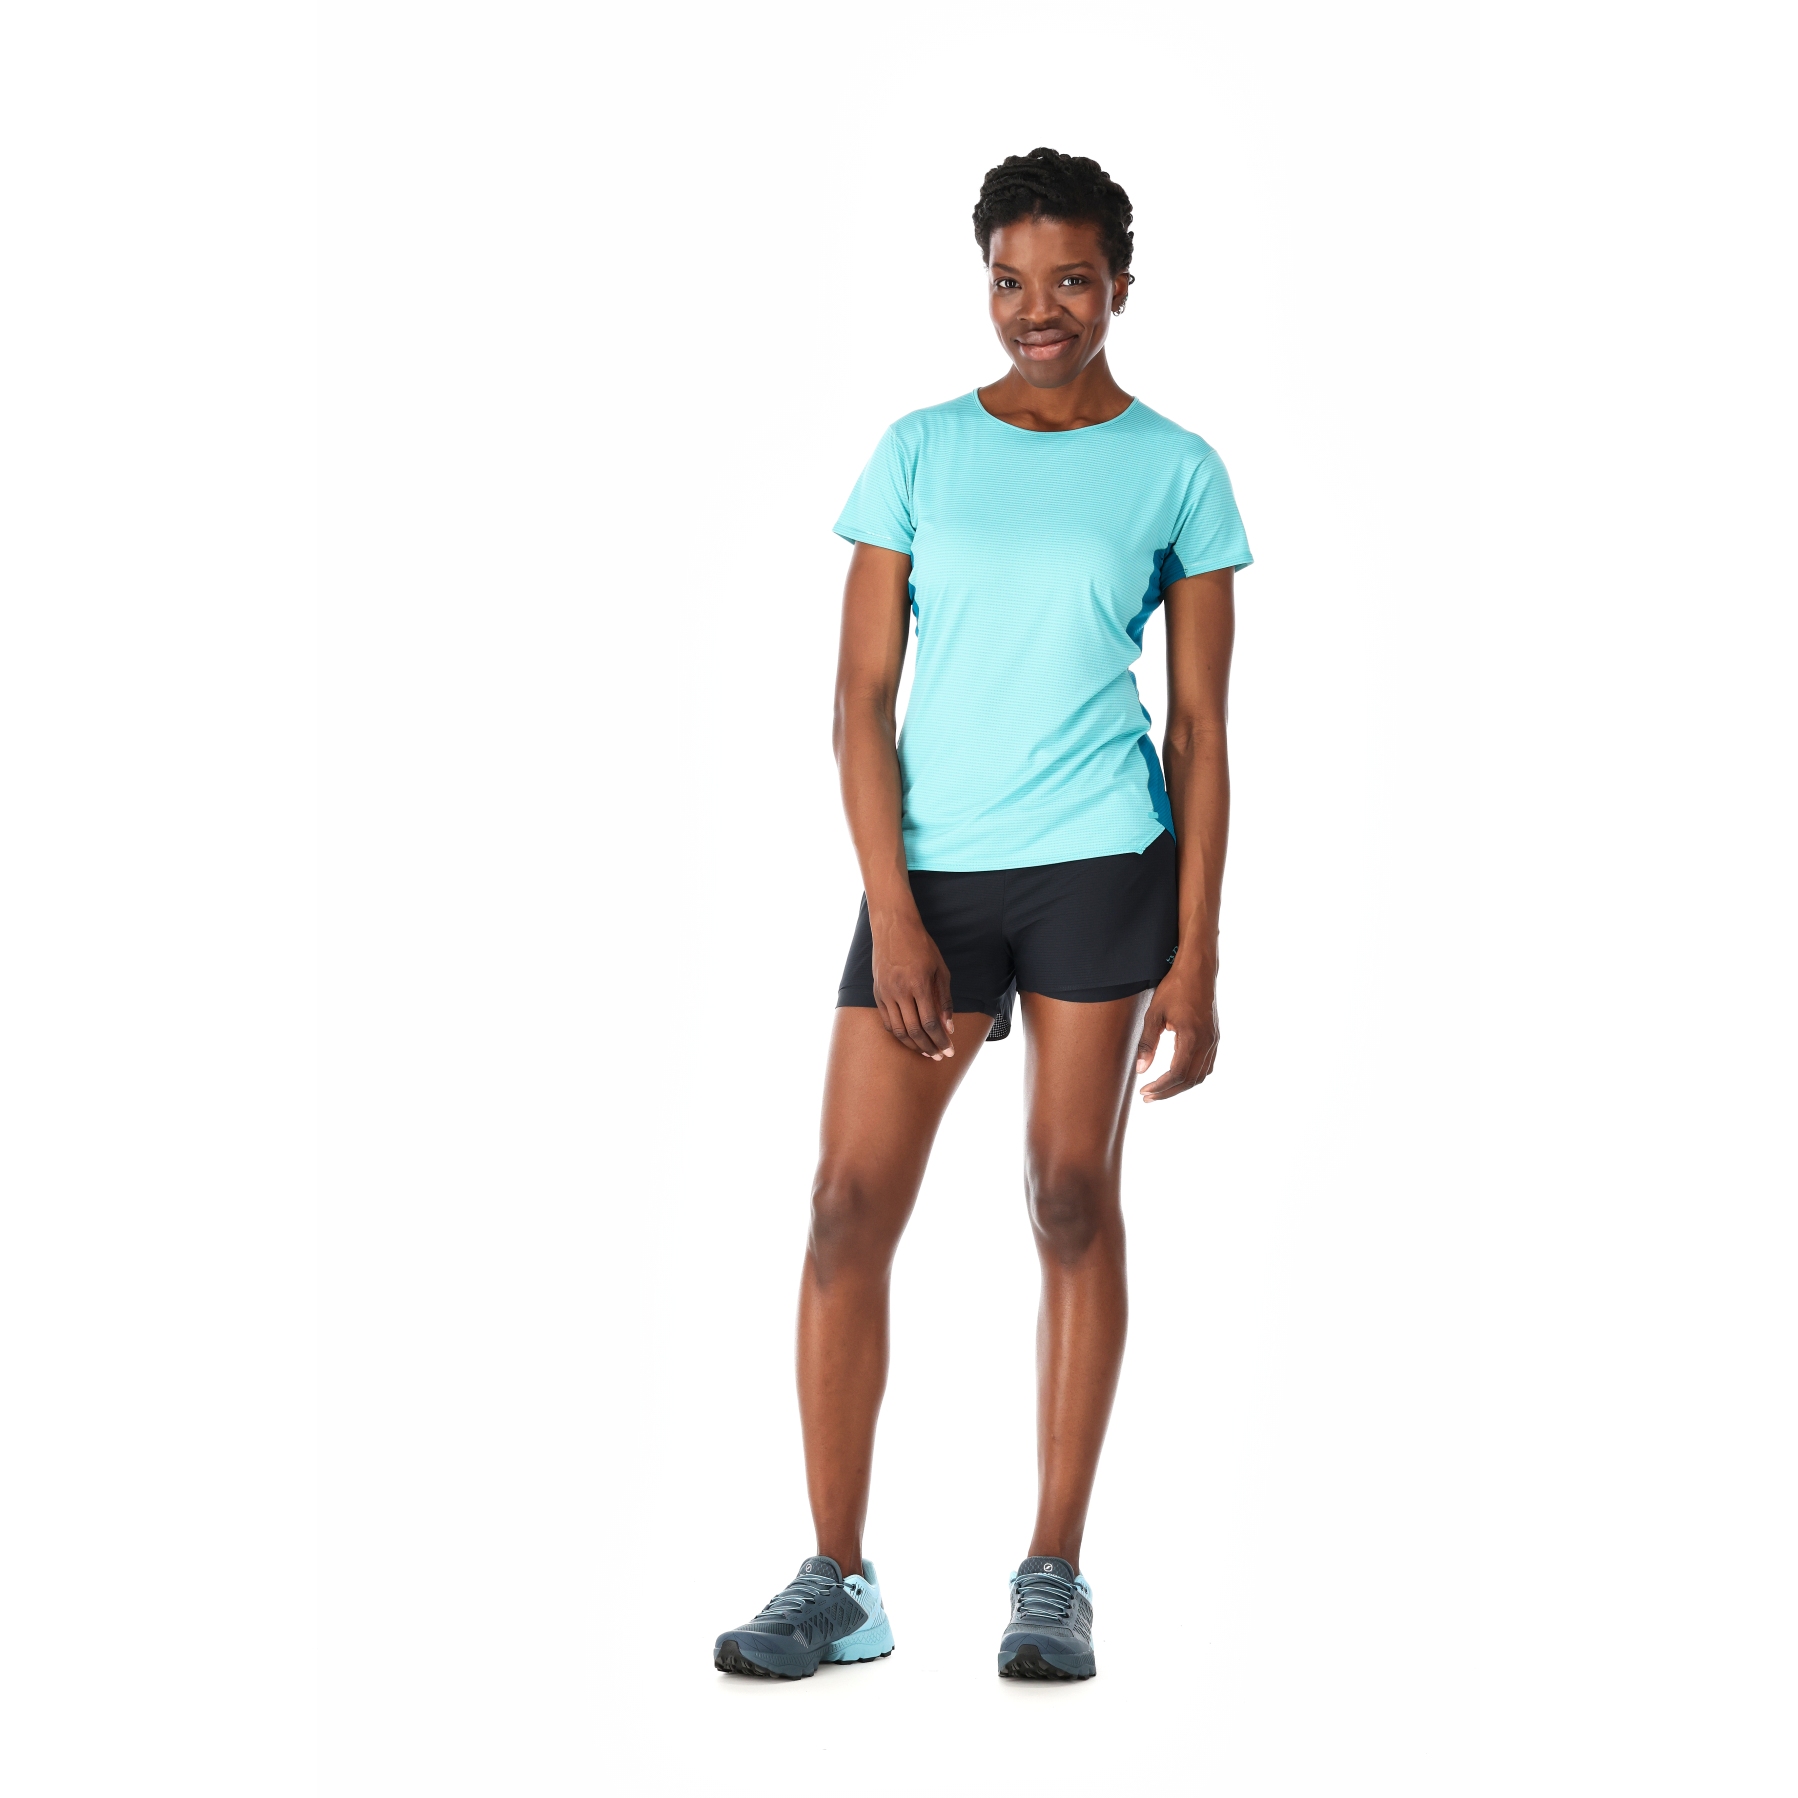 Rab Talus Tights Shorts Women's. Close fittting ladie's trail running